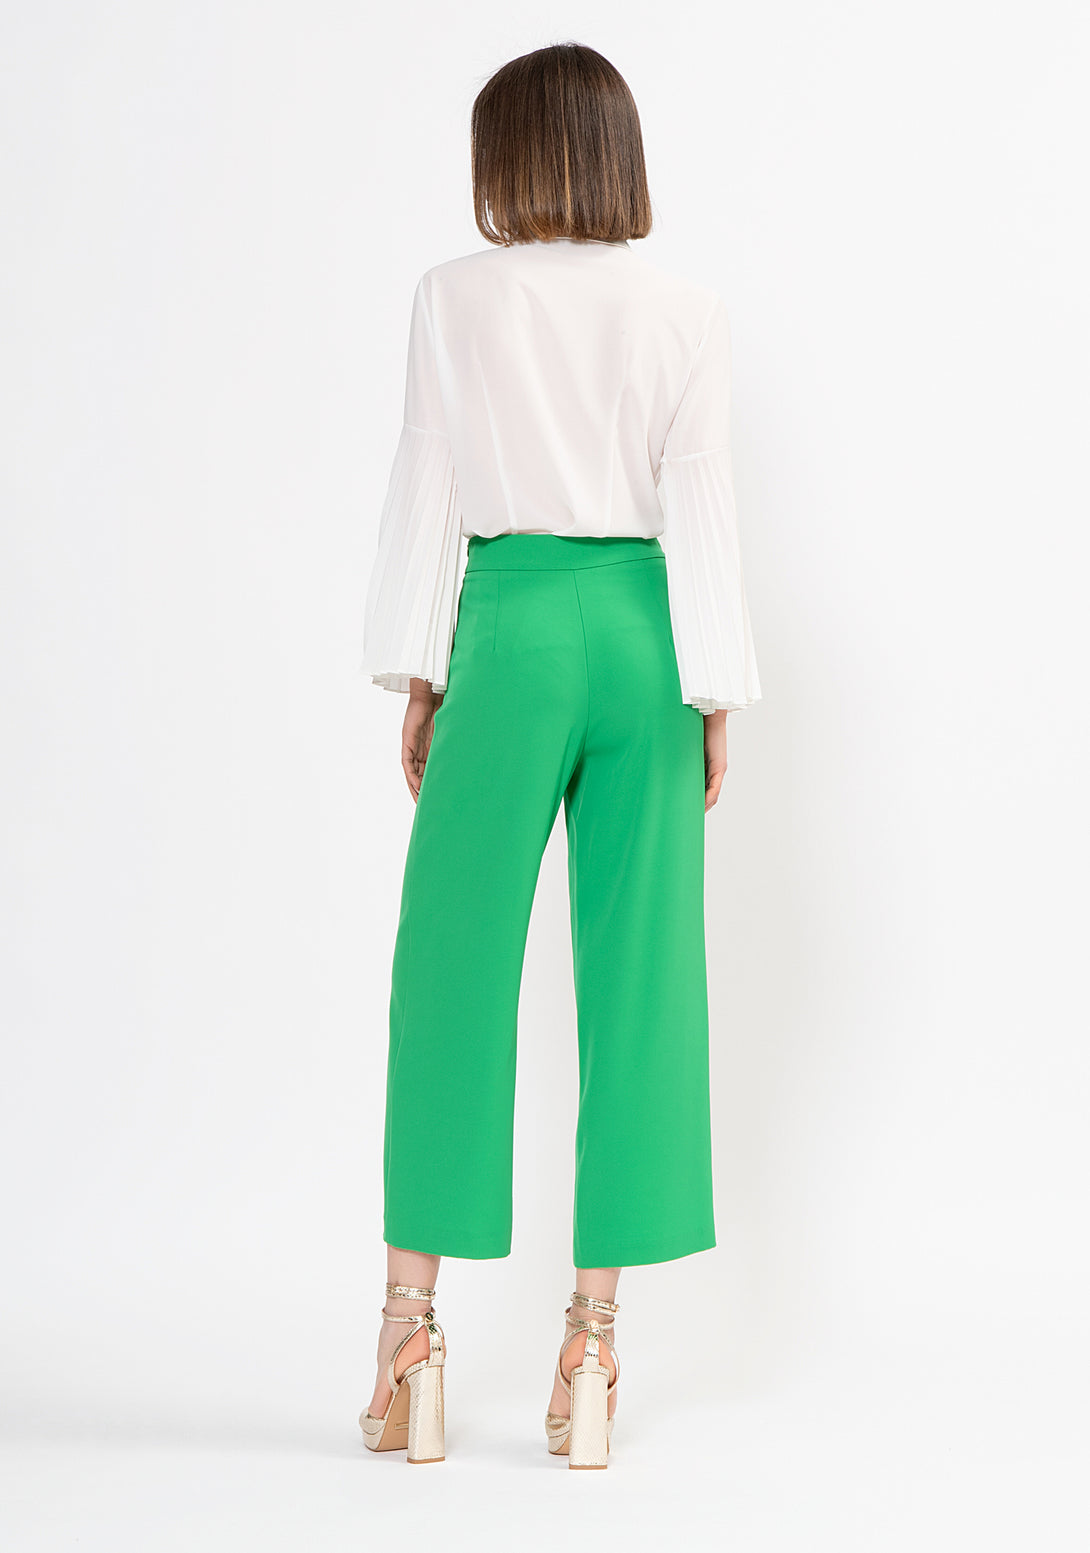 Culotte pants flare made in crèpe